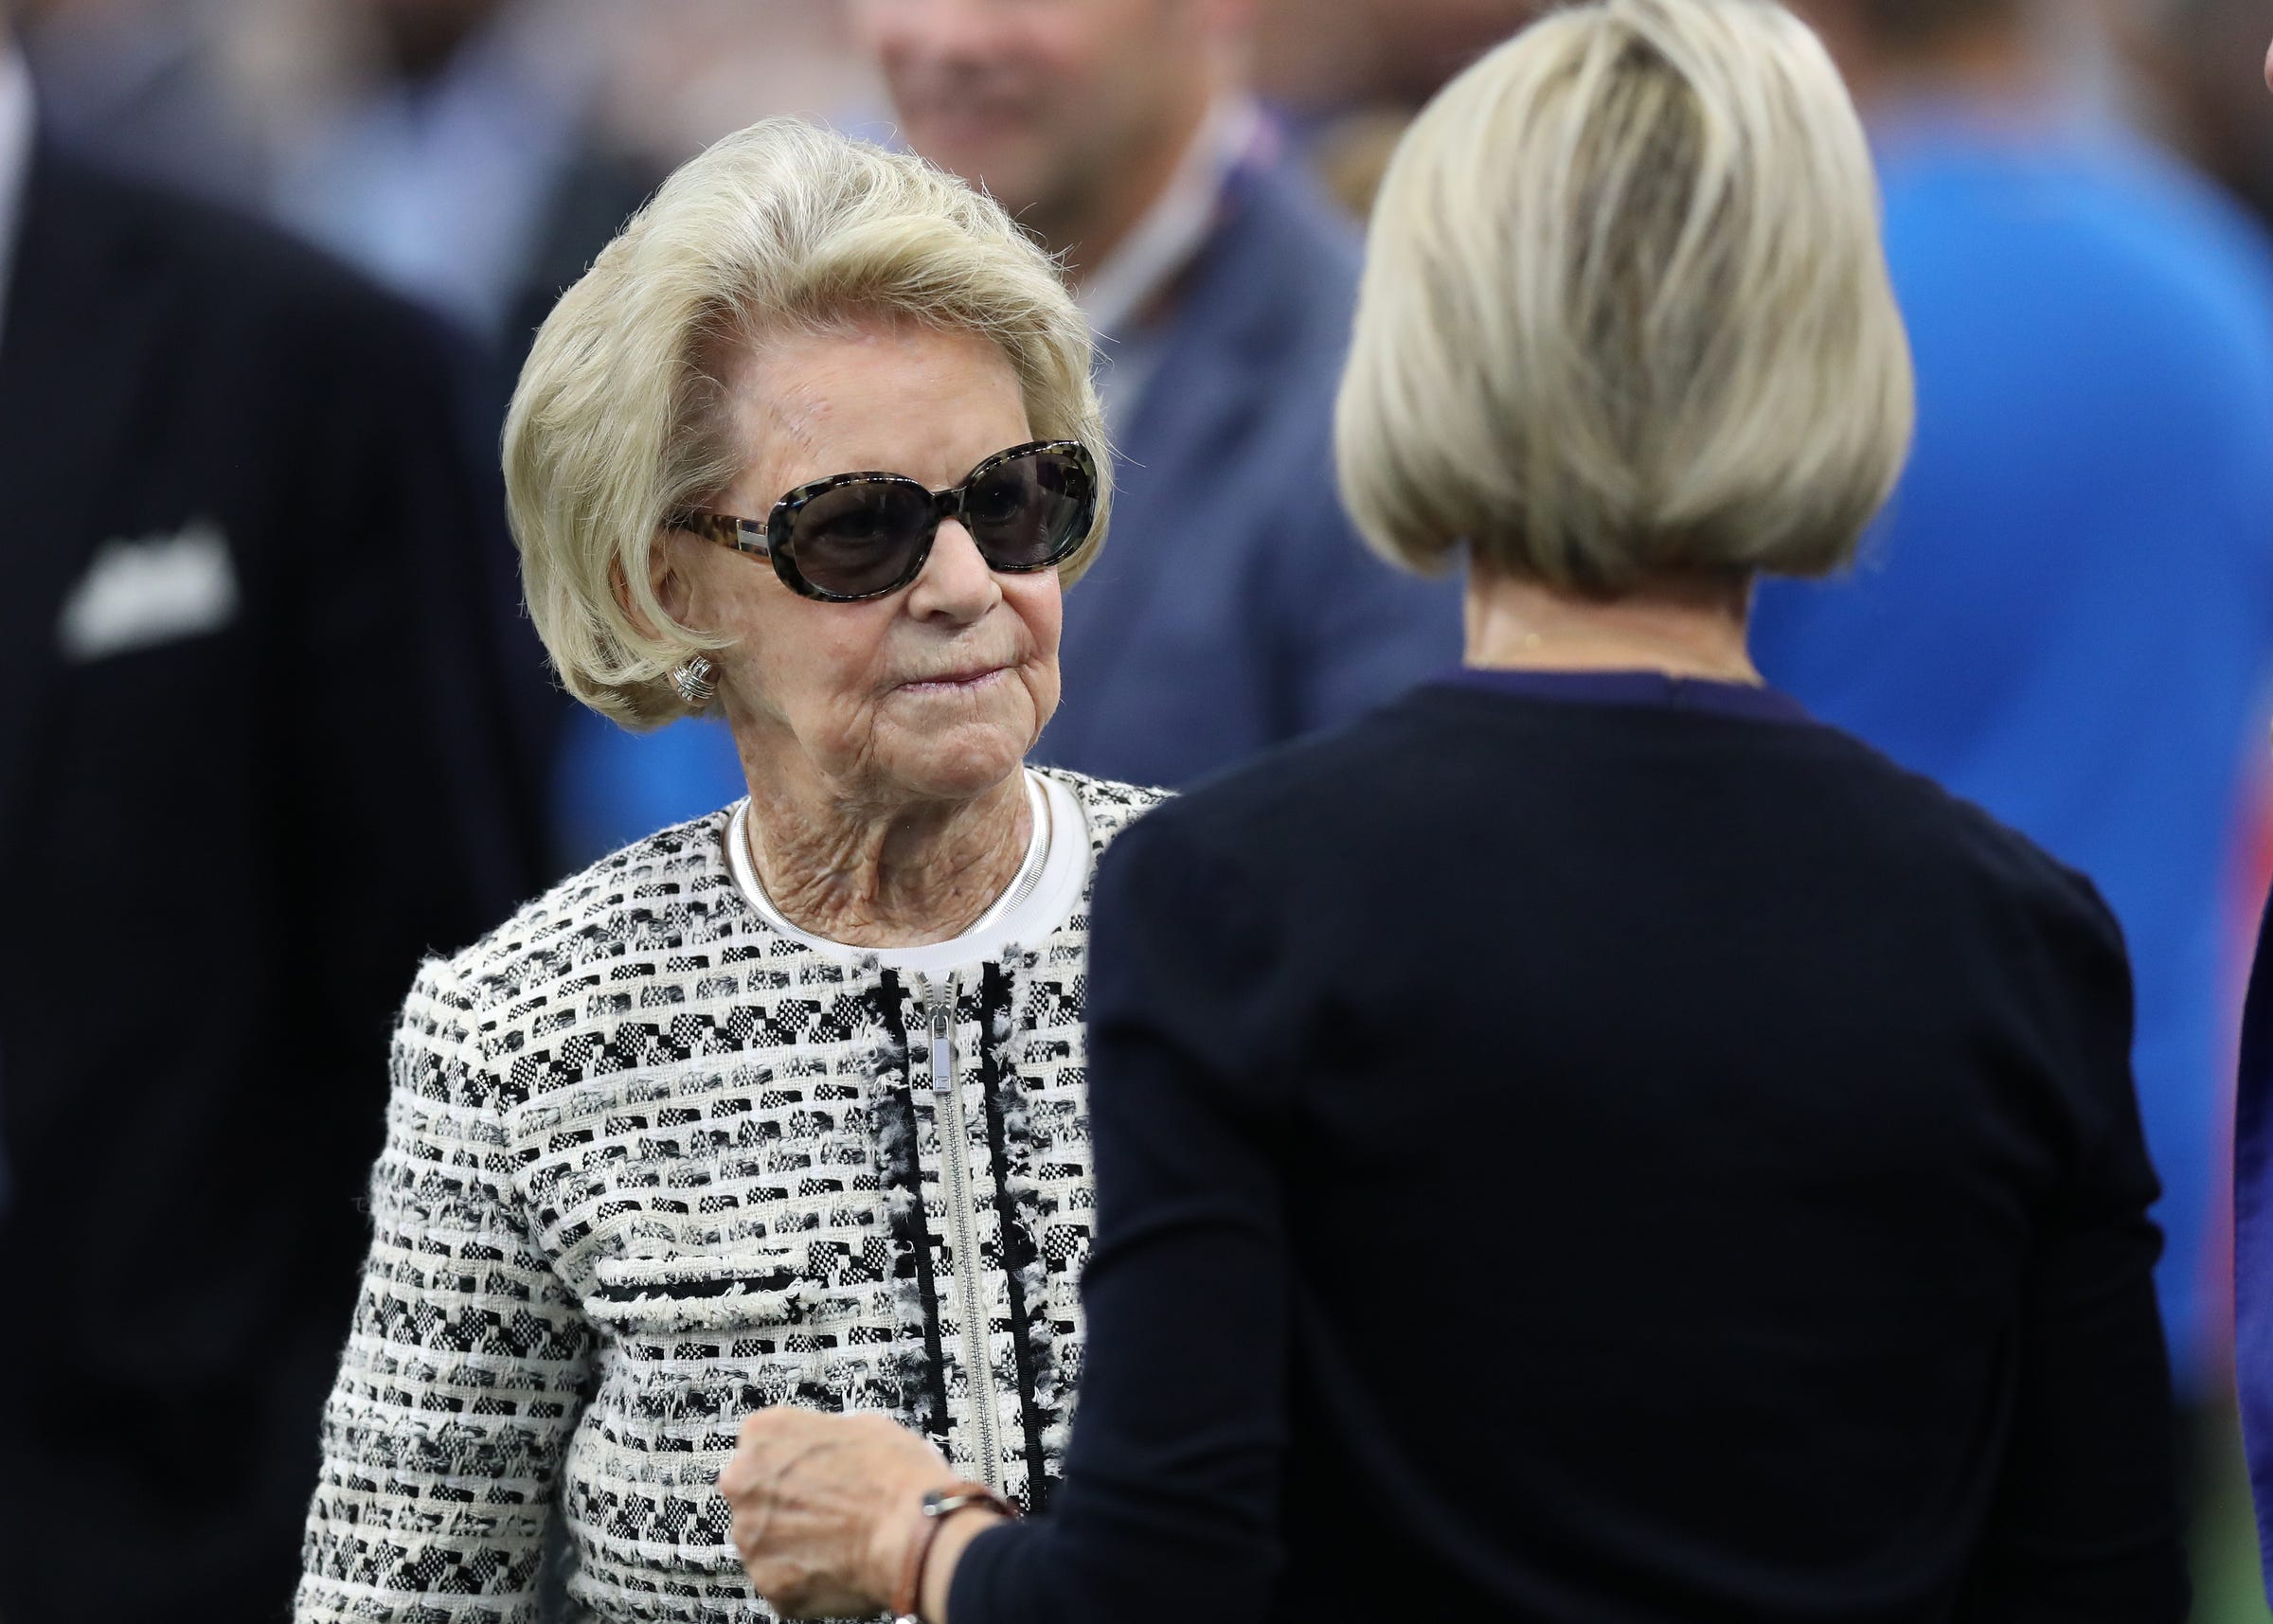 Detroit Lions' Martha Ford has 'a lot less patience' for mediocrity than husband